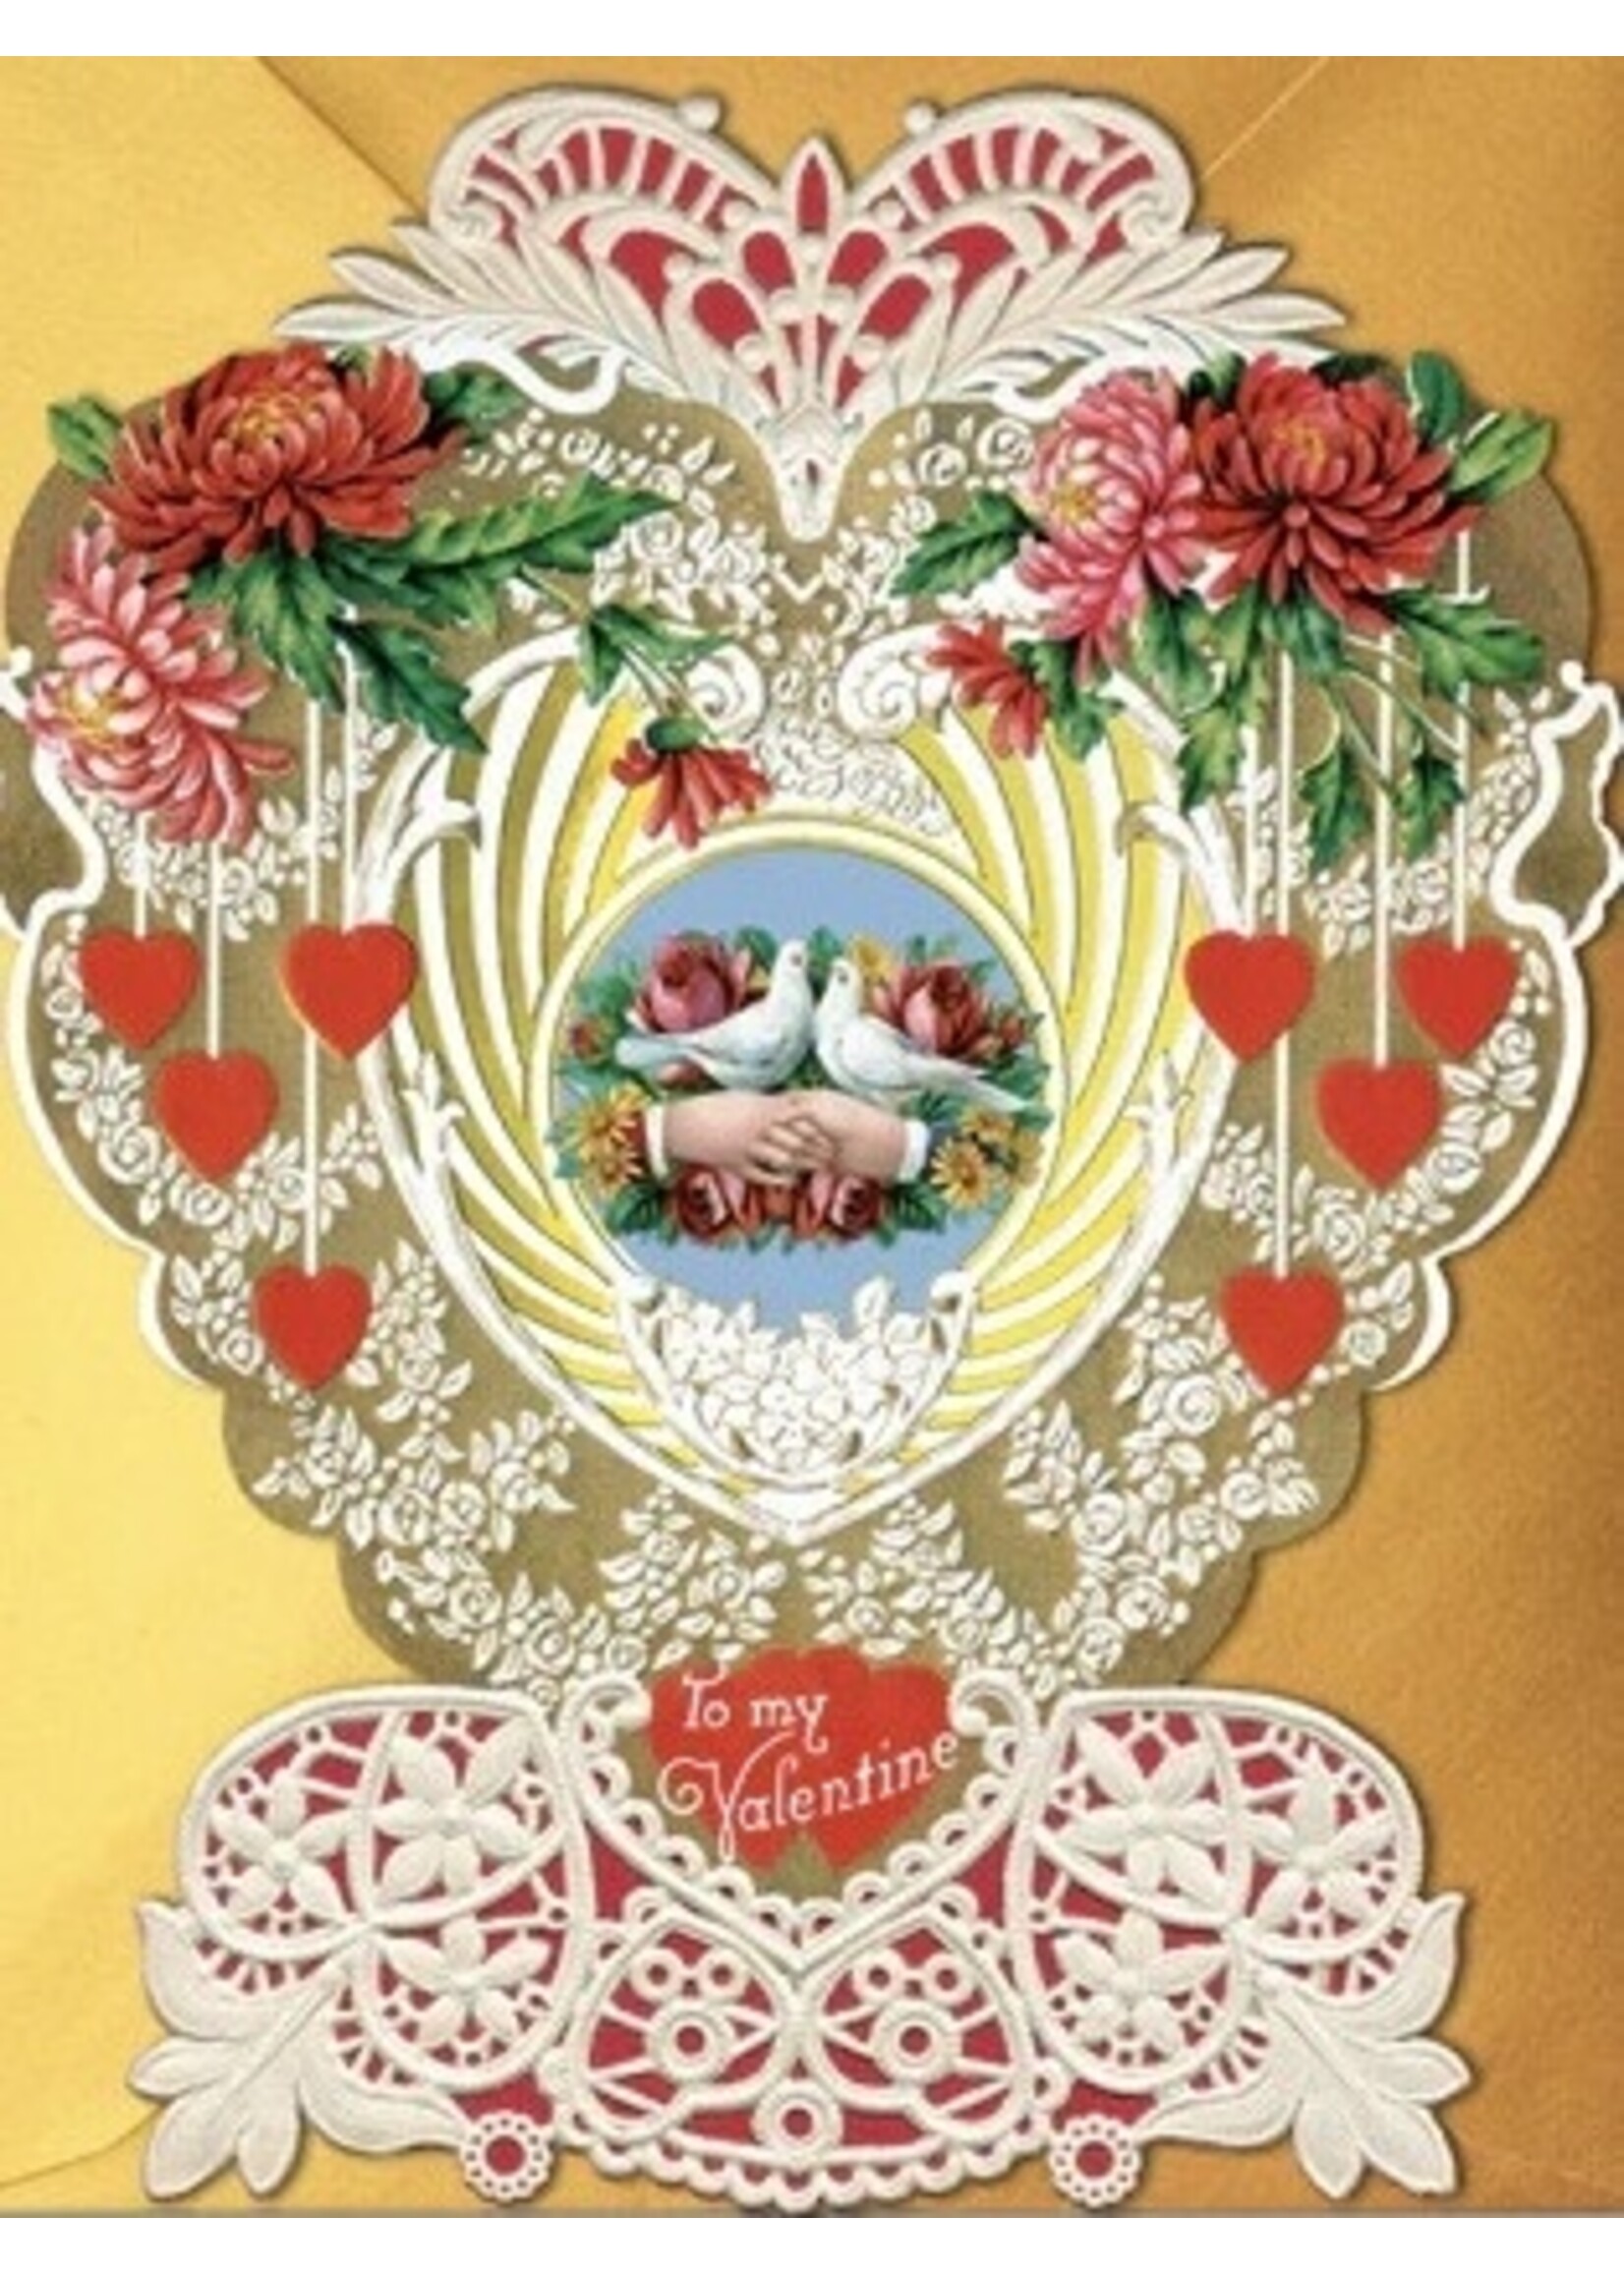 Laughing Elephant Valentine greeting card "Victorian Heart" by Laughing Elephant